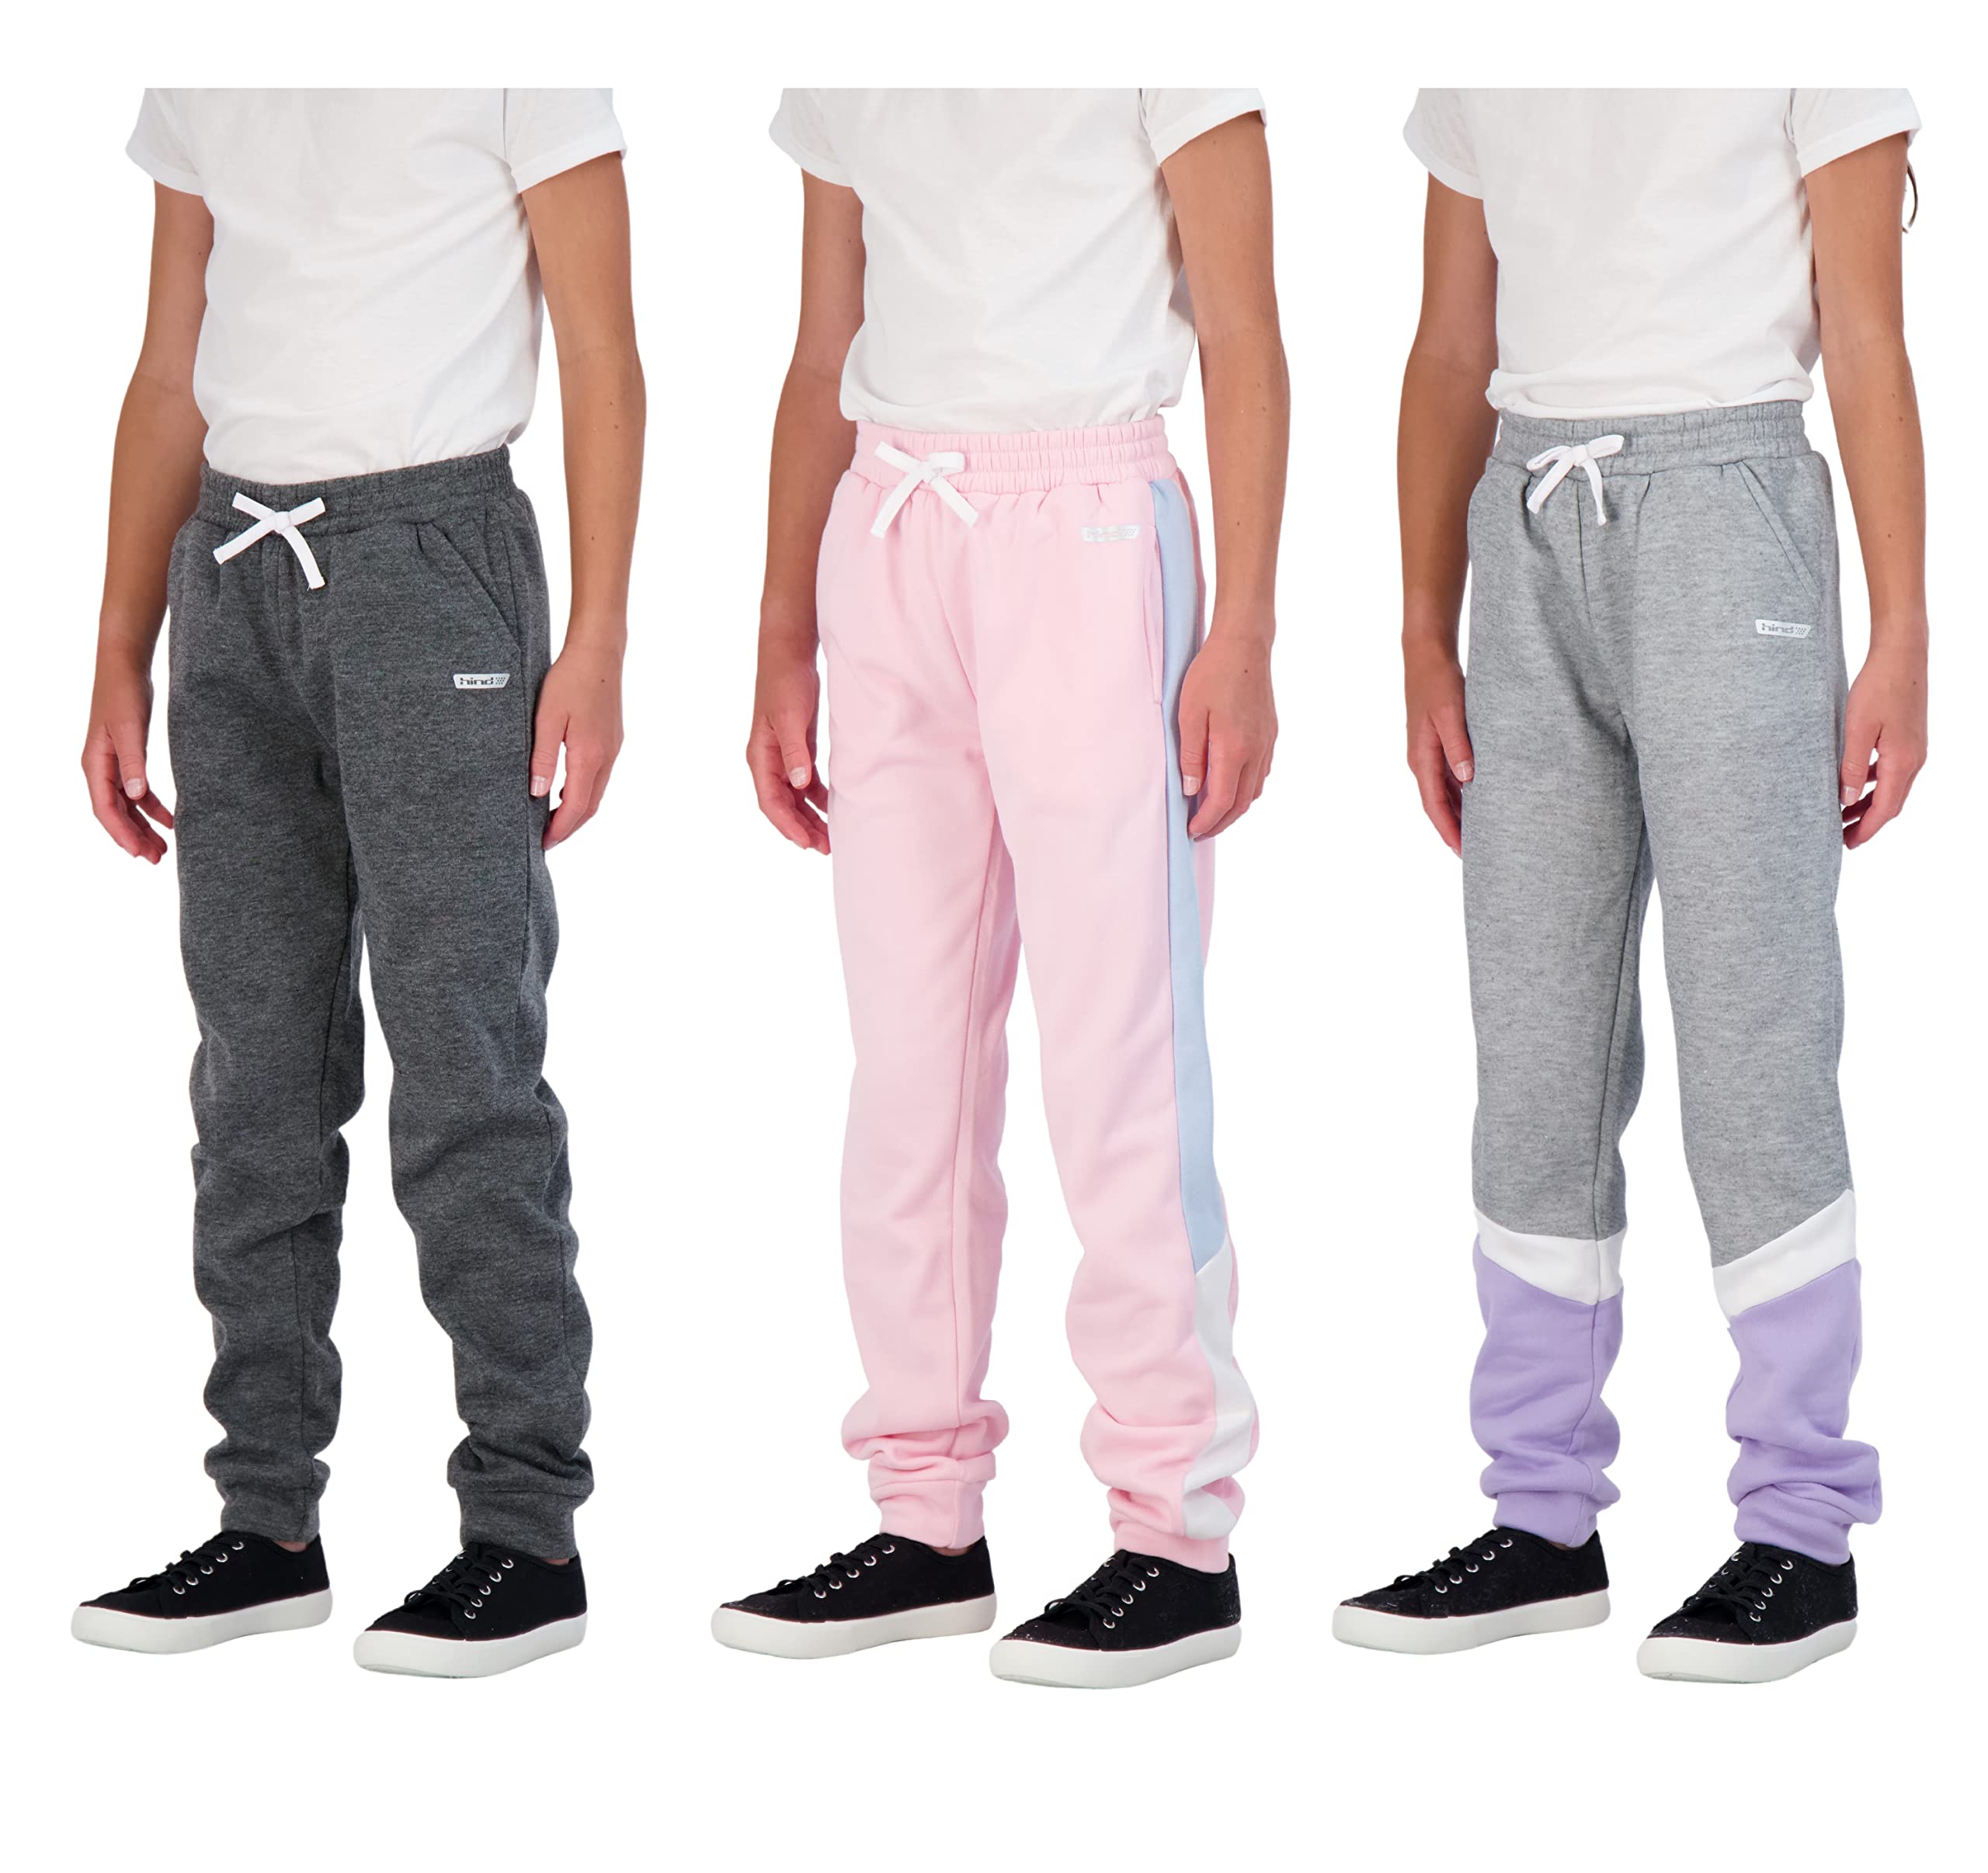 Hind 3-Pack: Girls Sweatpants Active Multipack Fleece Jogger Pants for  Girls Athletics 14-16 Heather-light Pink-charcoal